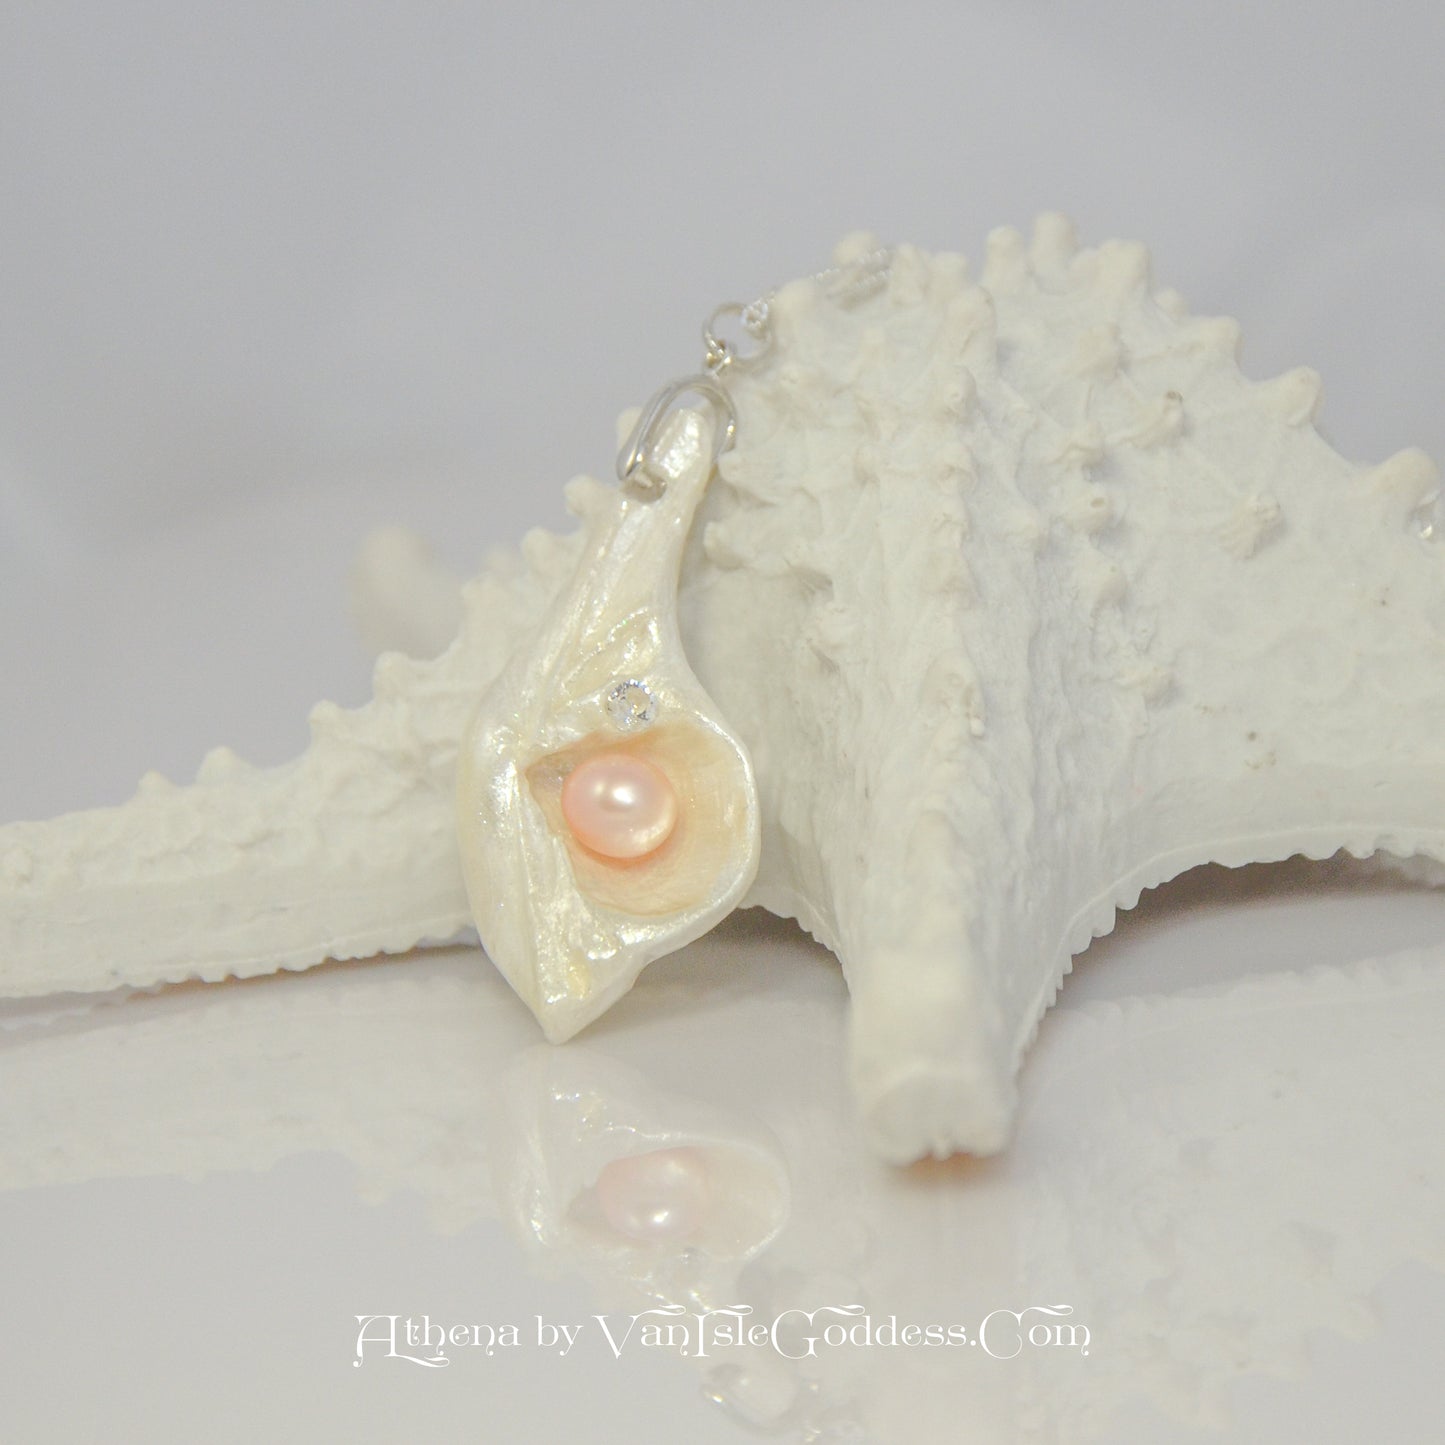 Natural Seashell Pendant with freshwater pearl and faceted herkimer diamond.  The pendant is leaning on a starfish.